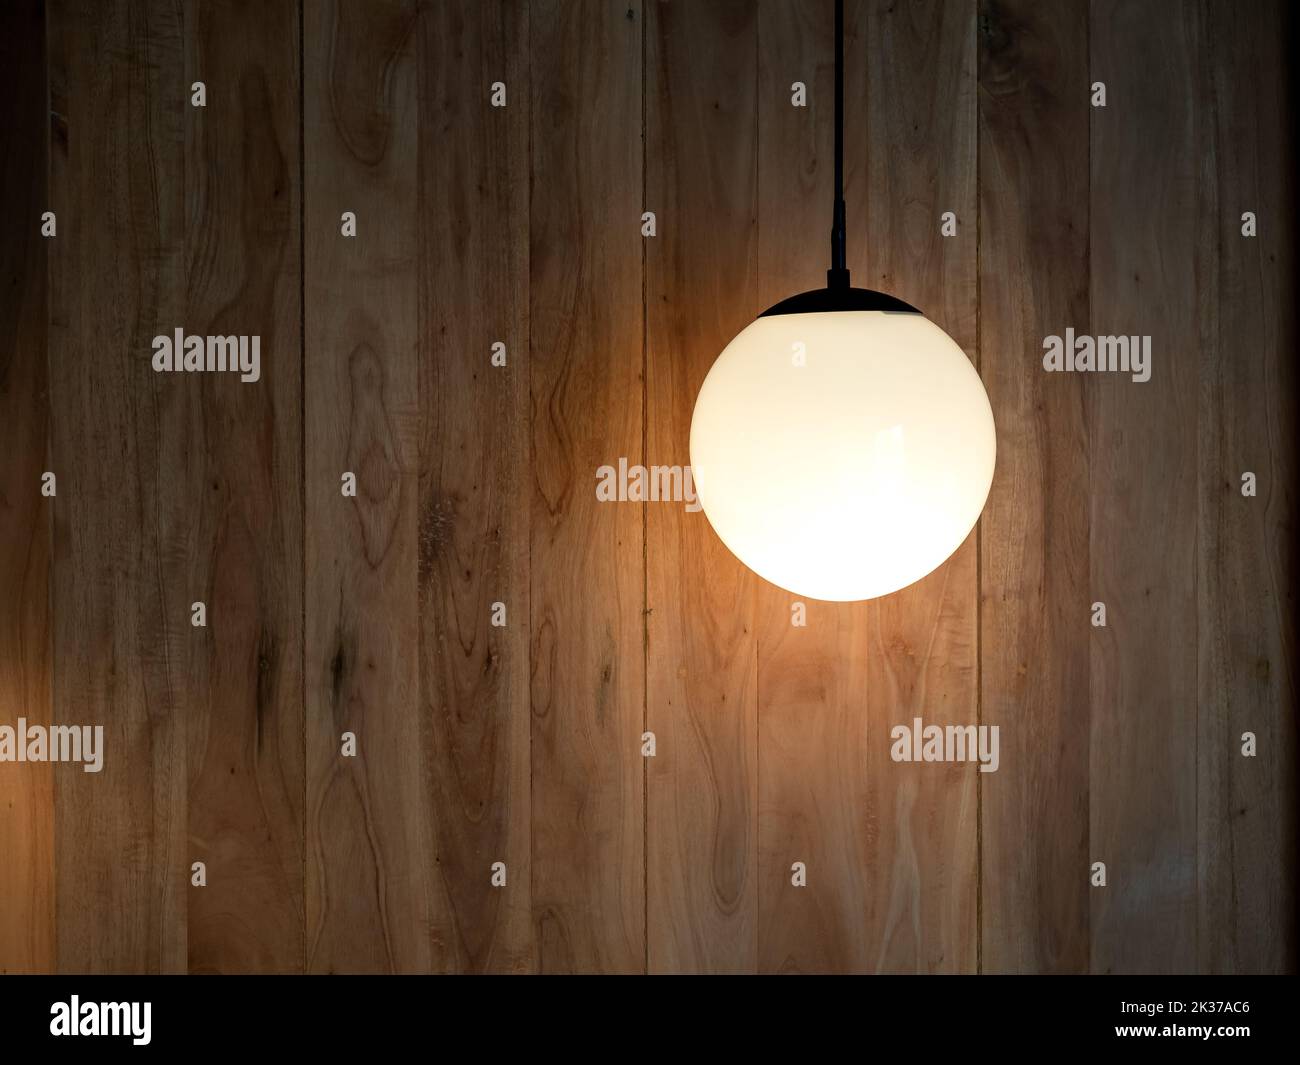 Round hanging lamp, full moon shape with the light bulb inside shining in the wood wall background in the dark room with copy space. Stock Photo